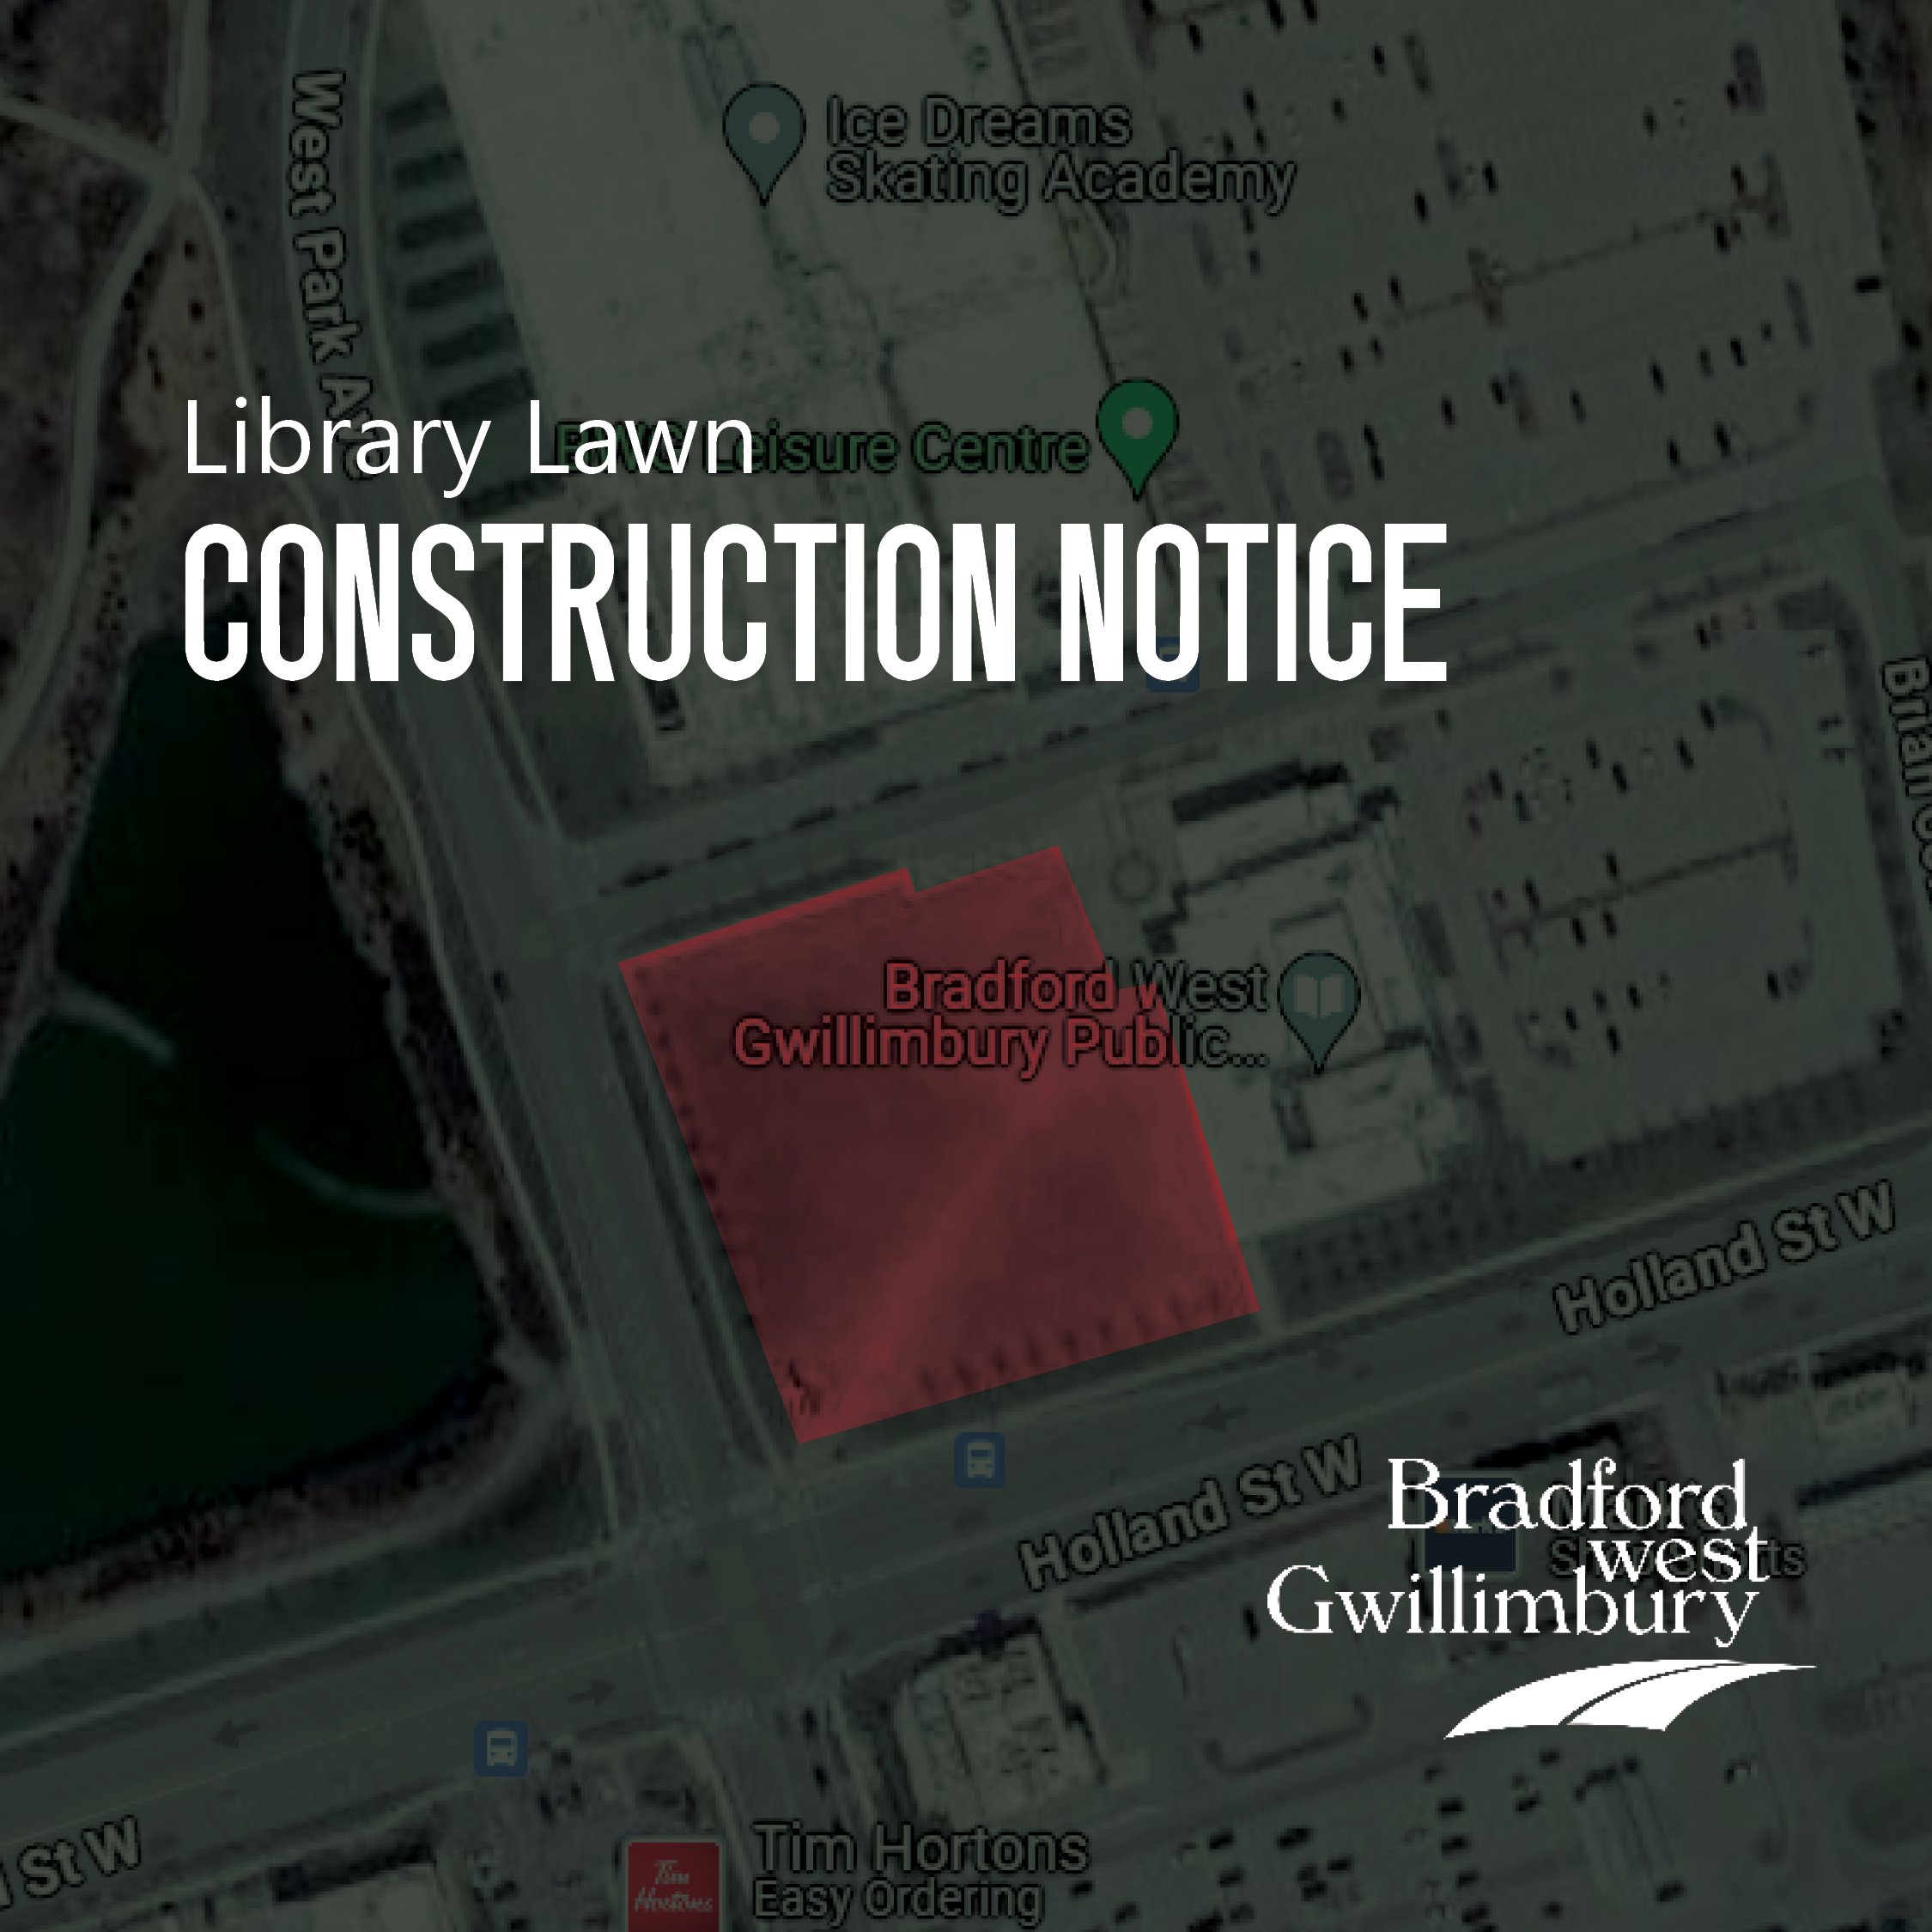 Map of BWG Library highlighting the Library lawn